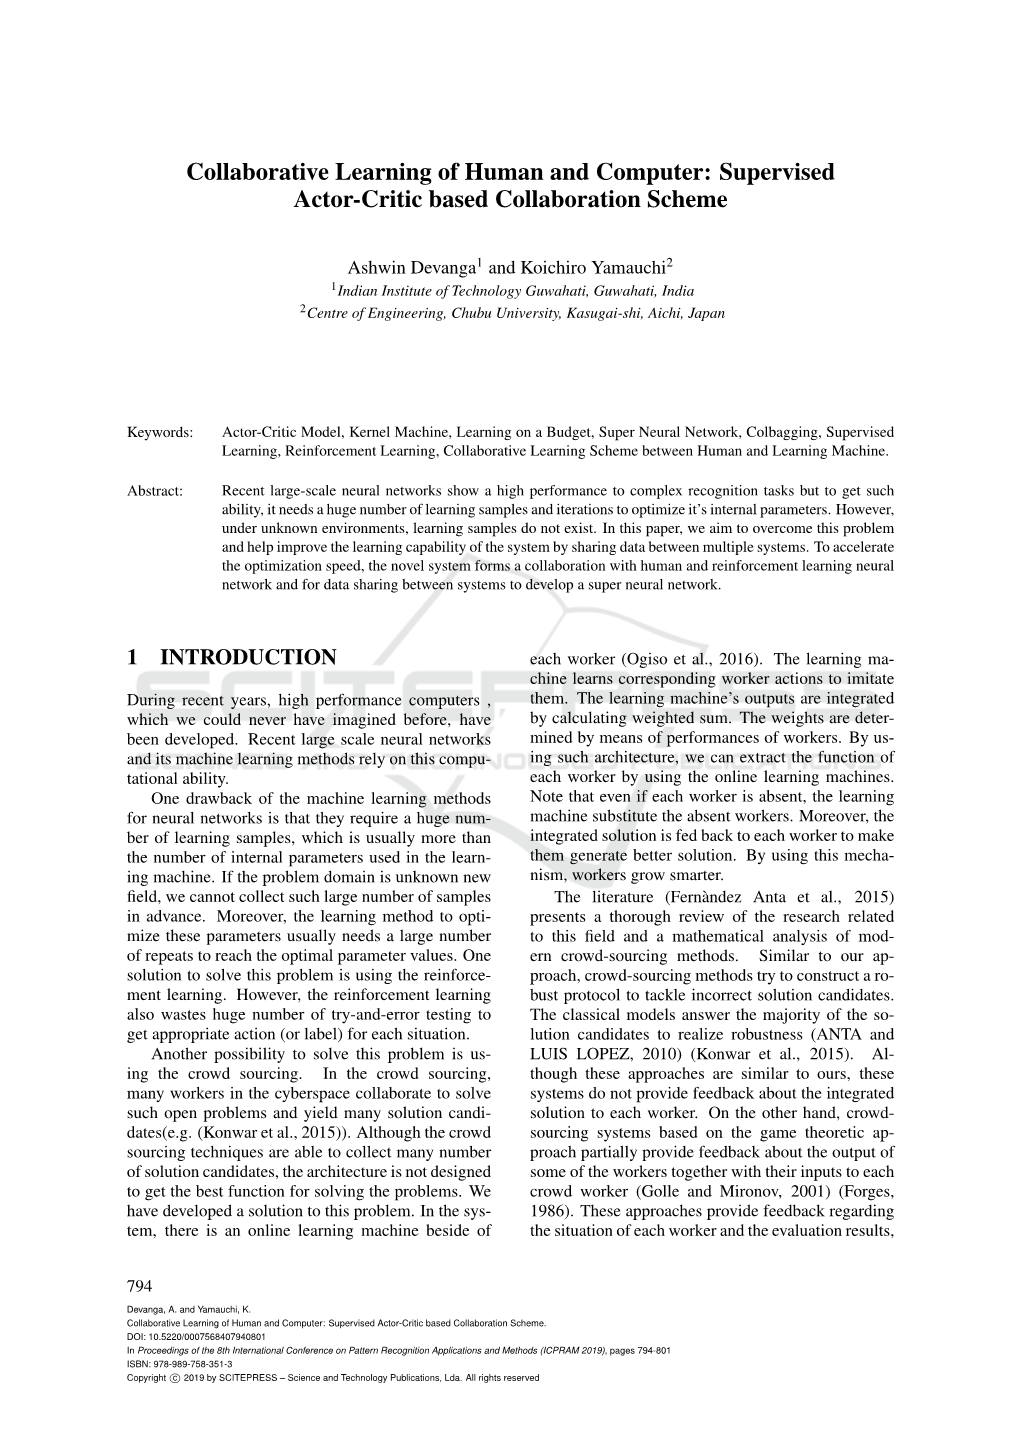 Collaborative Learning of Human and Computer: Supervised Actor-Critic Based Collaboration Scheme